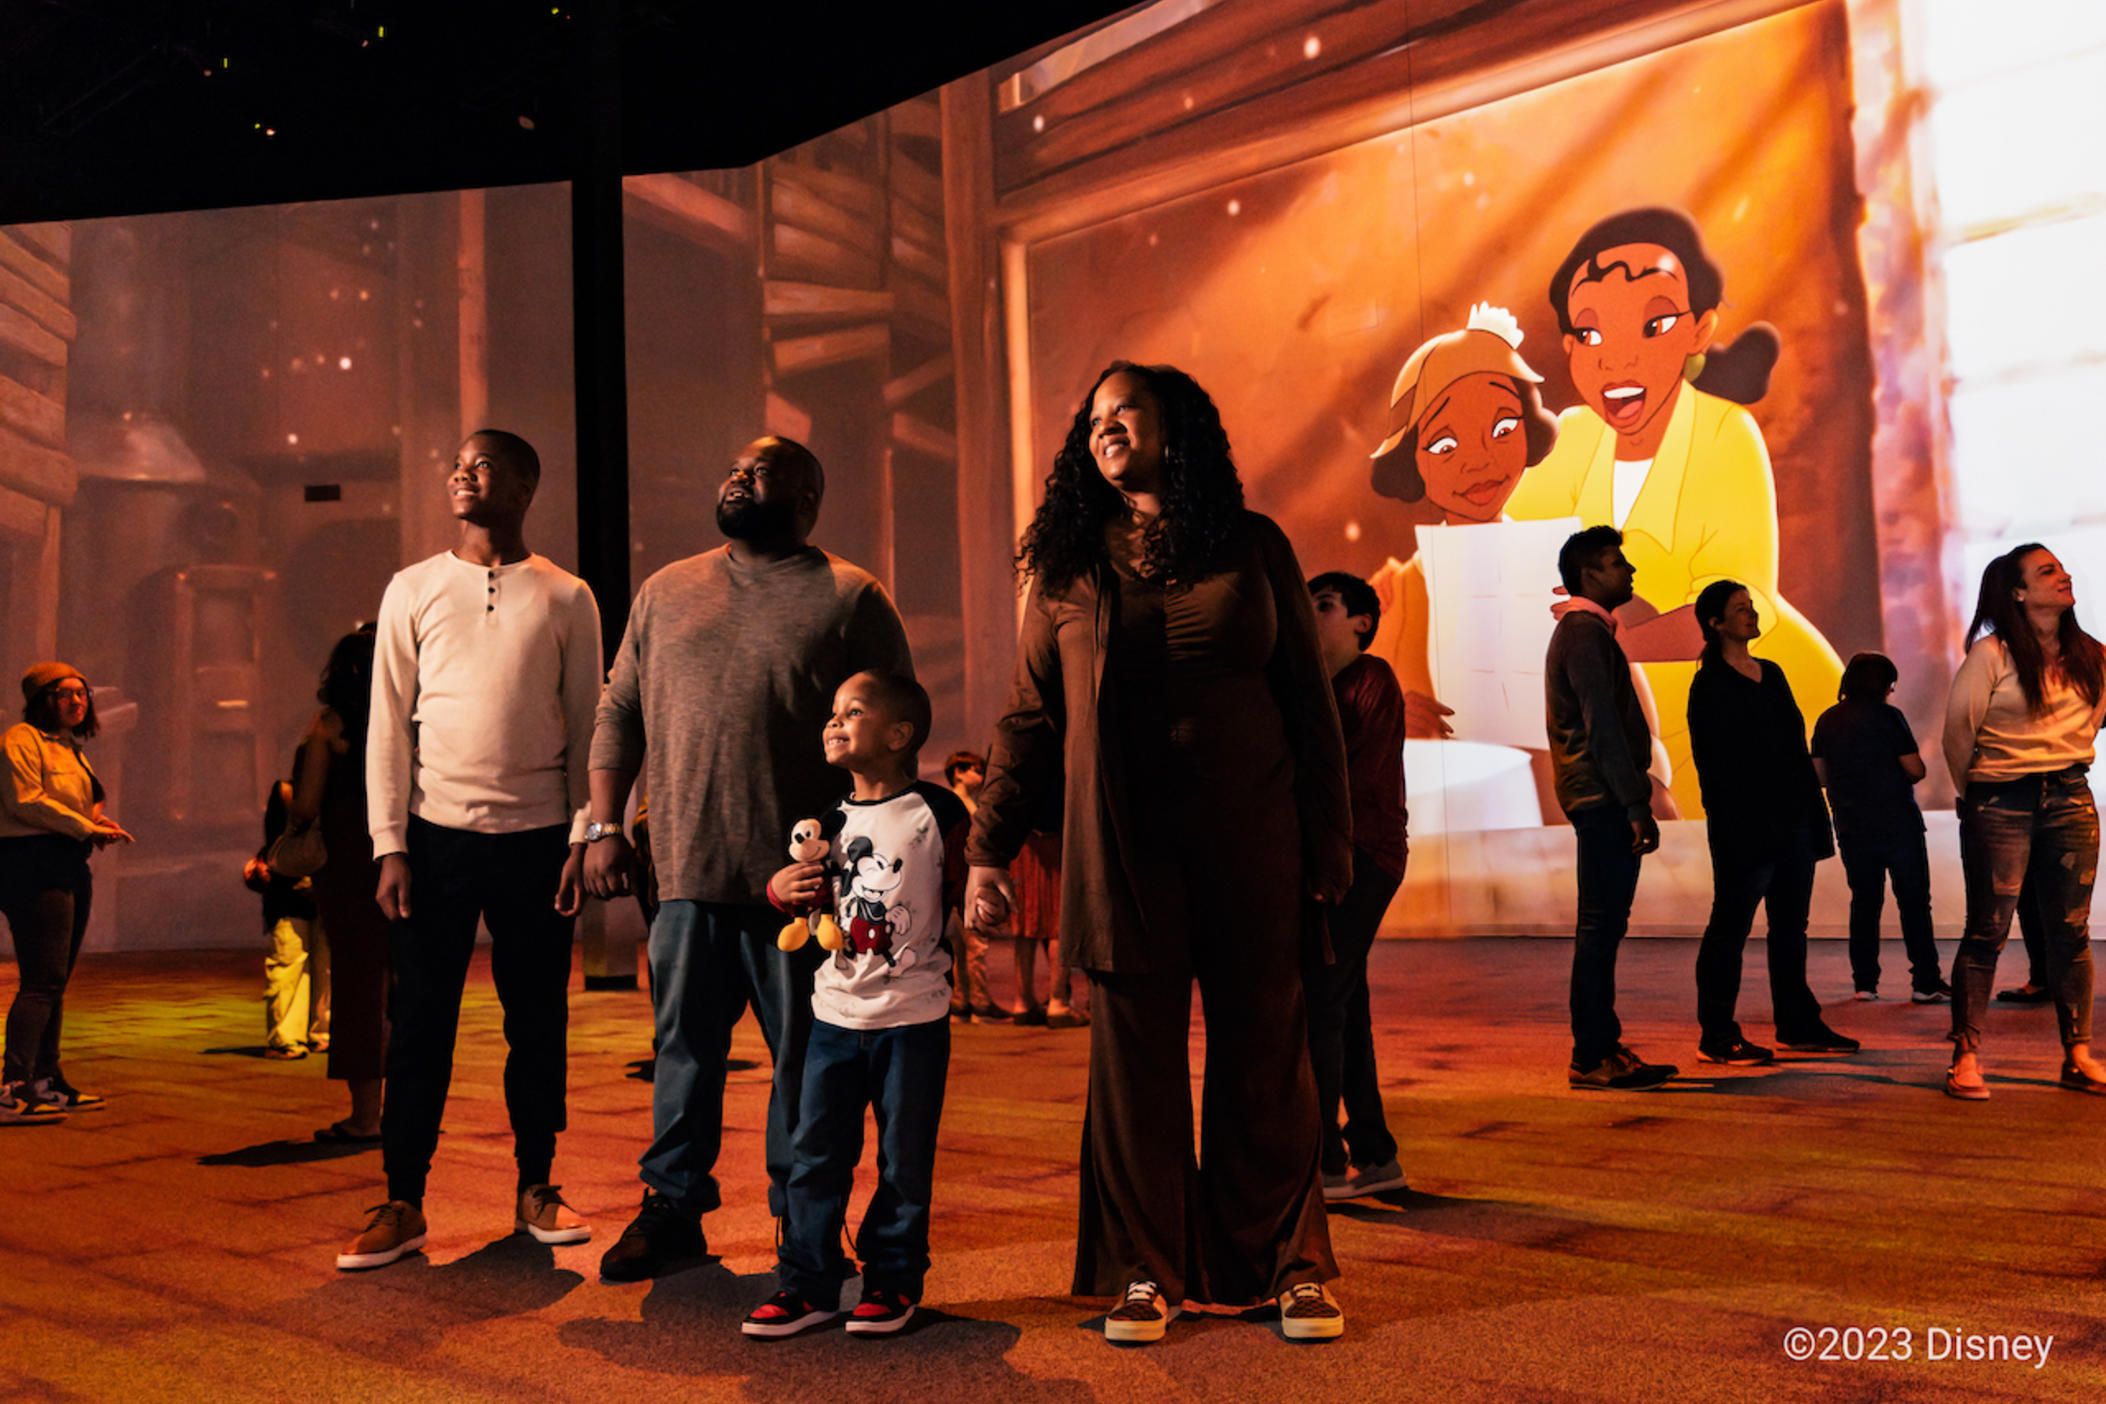 Lighthouse Immersive’s critically acclaimed Immersive Disney Animation will see its Atlanta premiere at the new Armour Yards development on May 1, 2023.